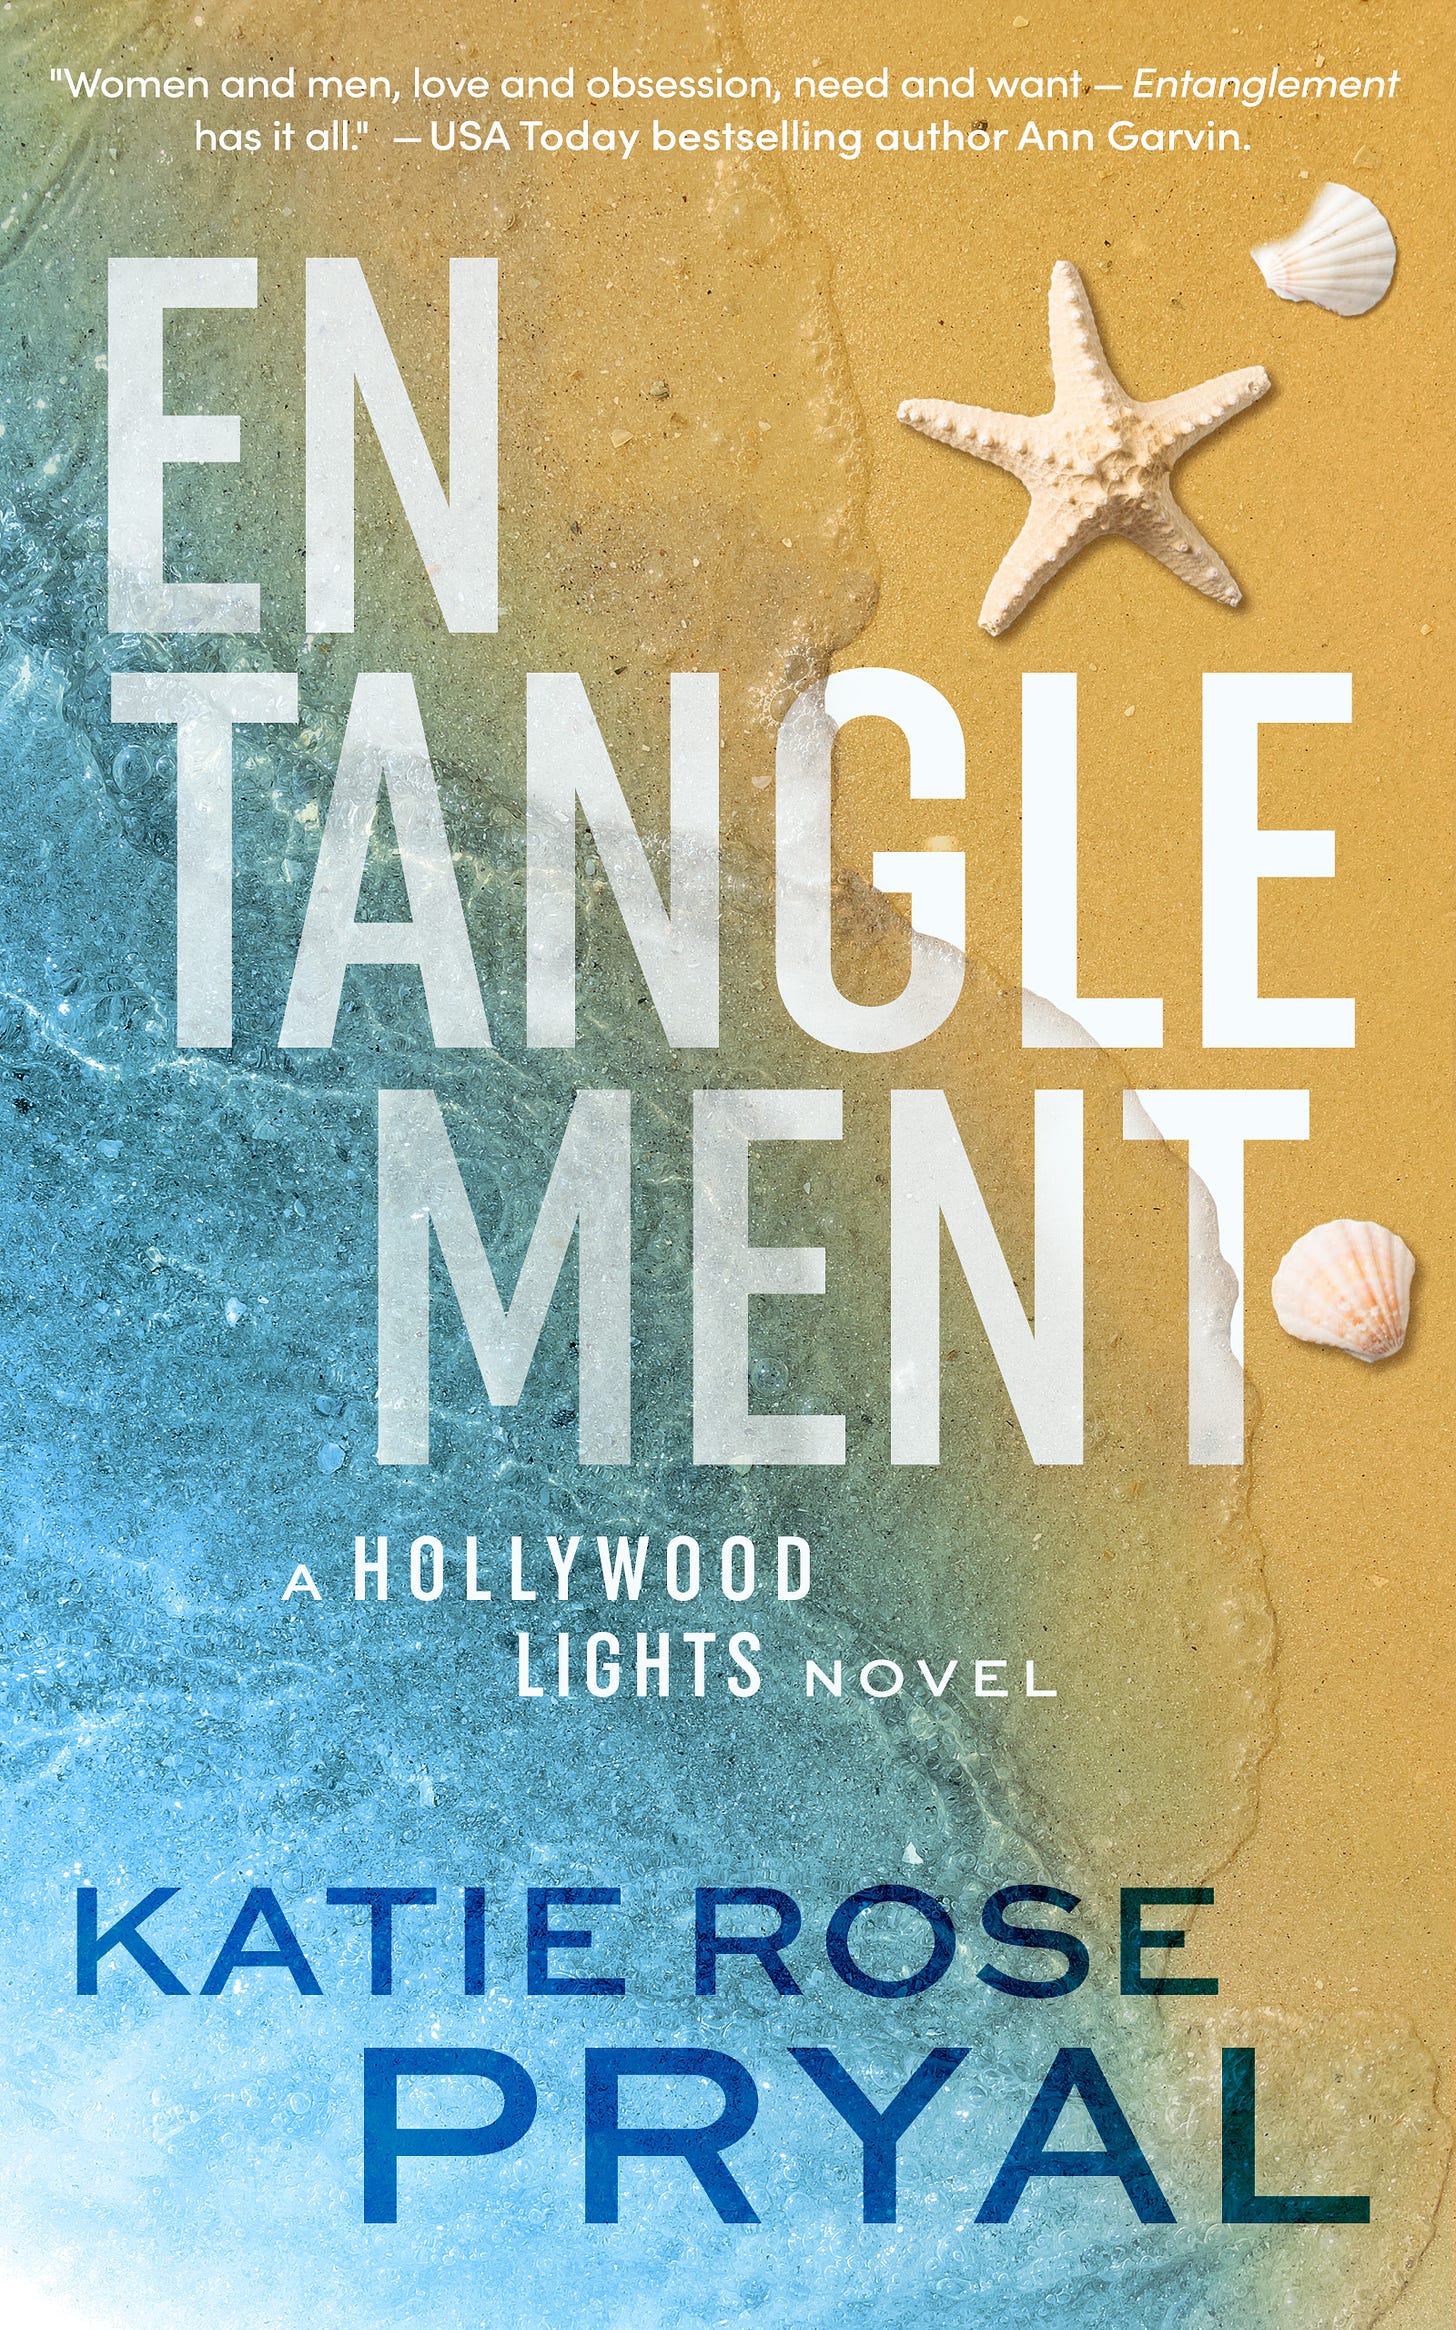 Book cover with white text "Entanglement" with background of beach sand and sea shells